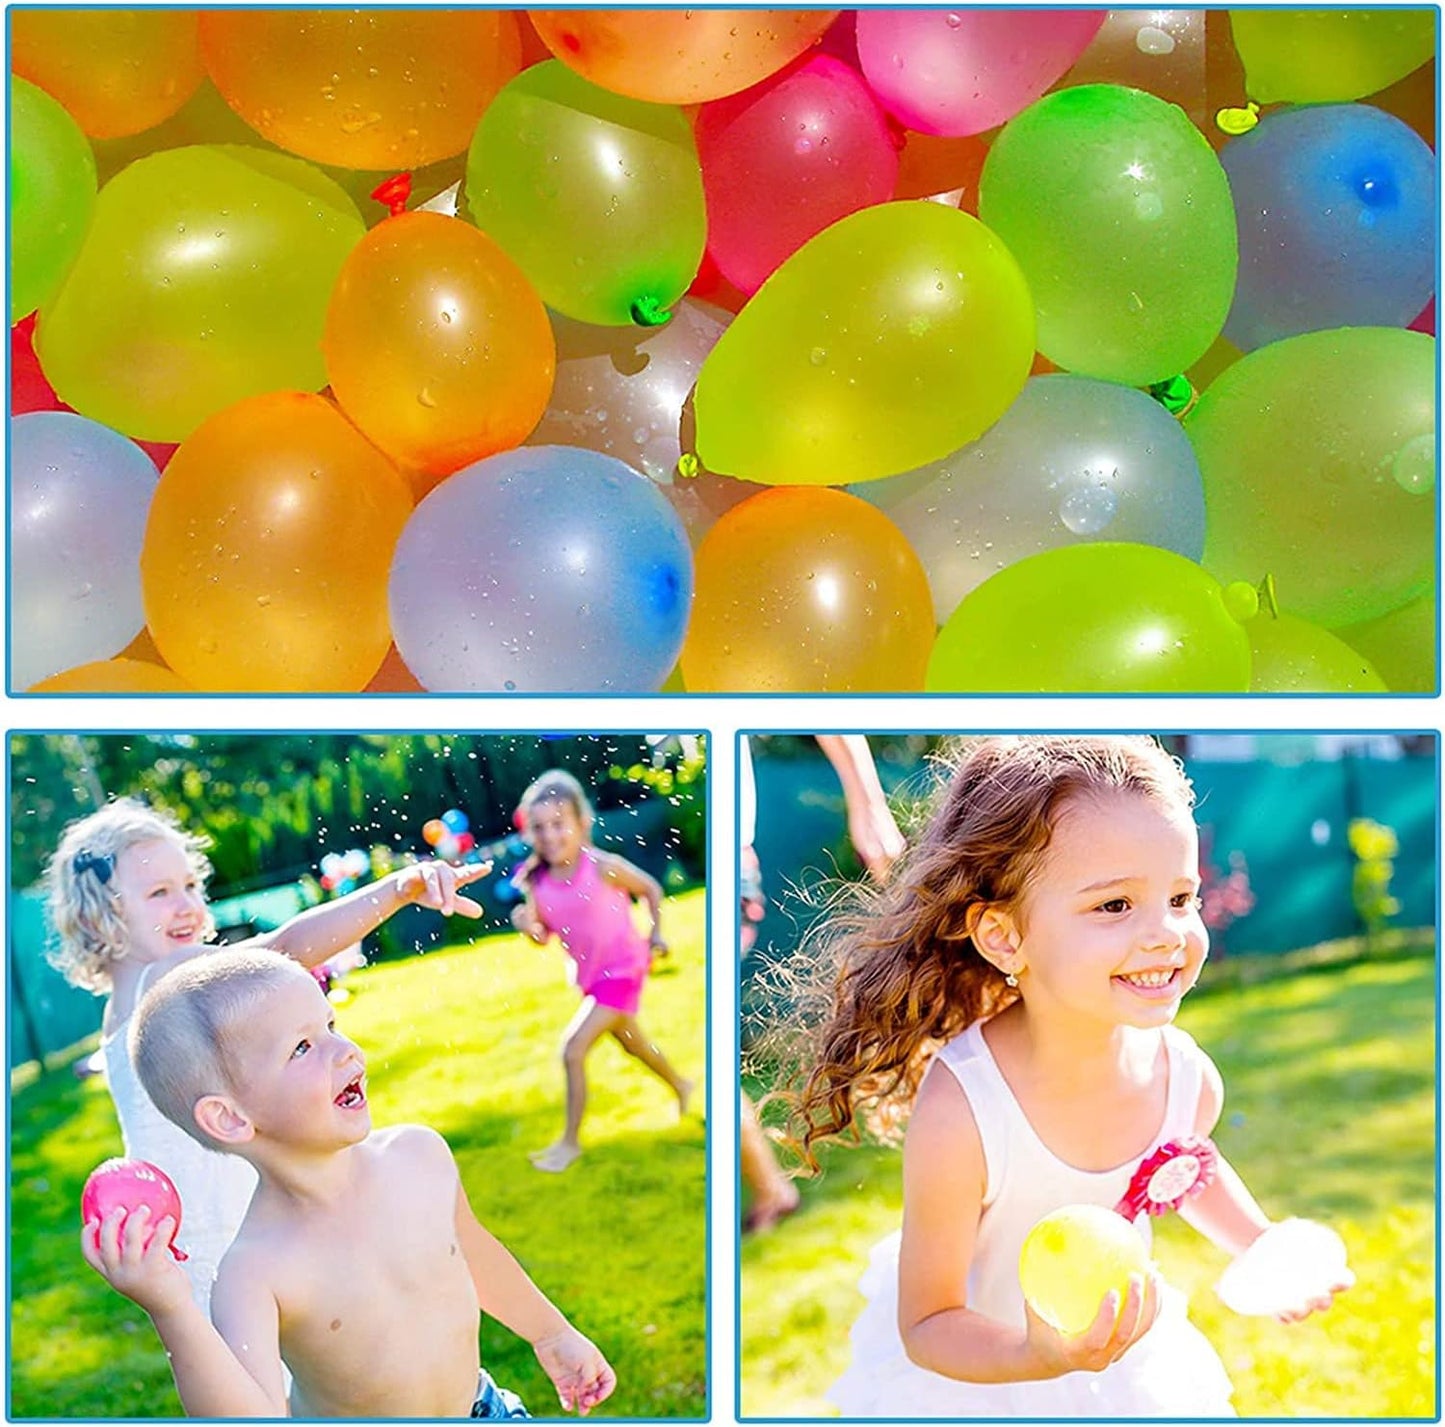 2000 Pack Water Balloons, 5-6 Inches, Multi-Color, Biodegradable Latex, Includes 2 Hose Nozzles, Great for Summer Party